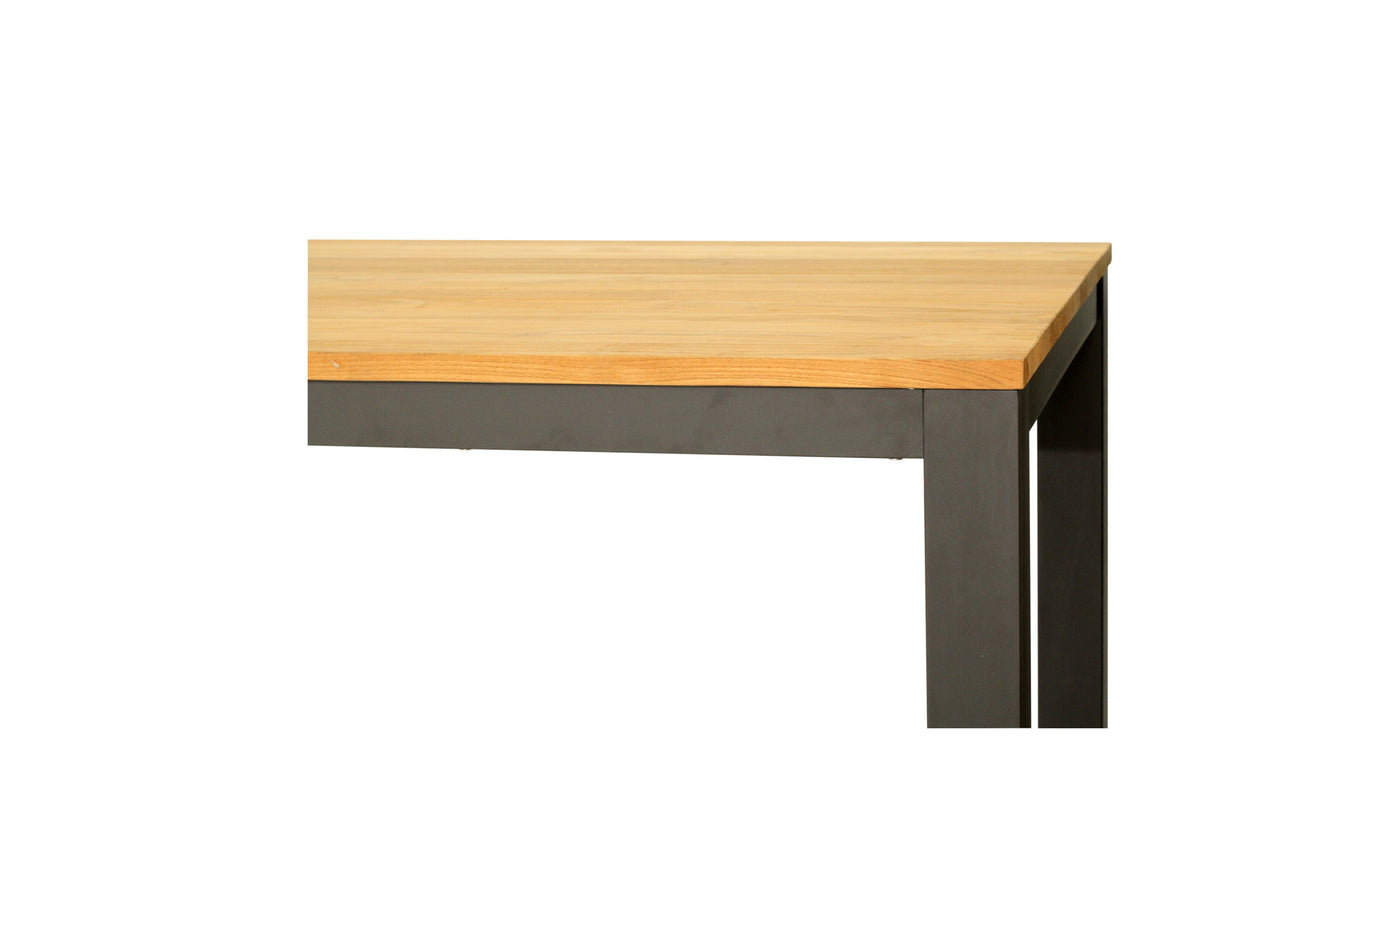 Carmel Outdoor Extension Table 2.3m - Asteroid Black (Charcoal) Powder Coated Legs